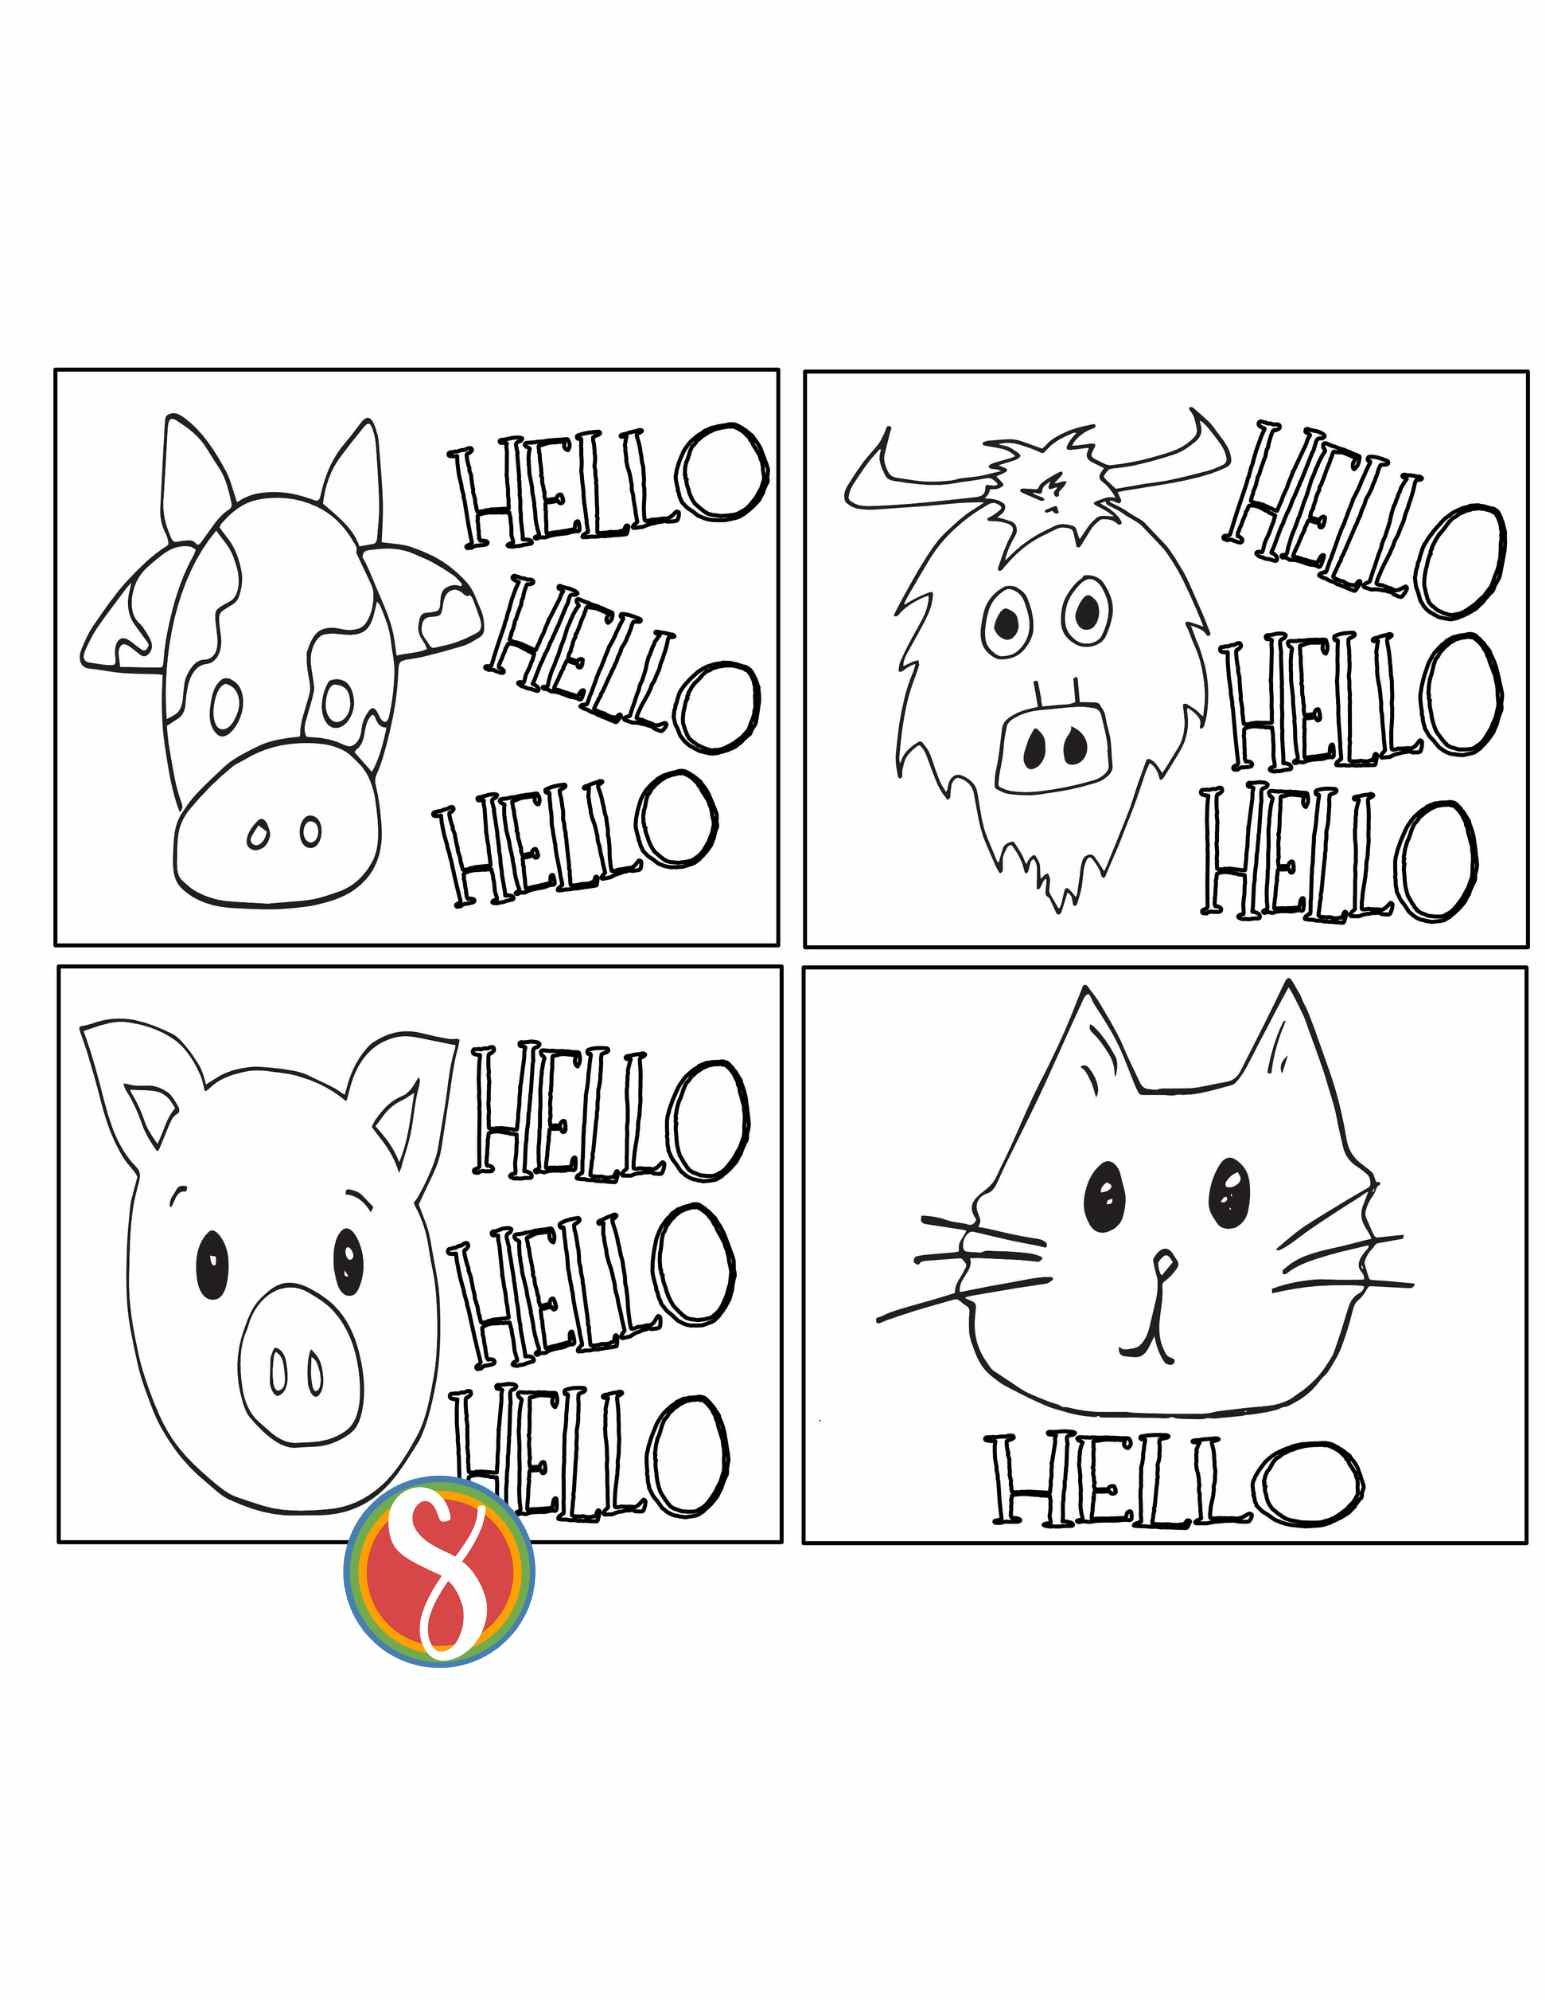 Image is a coloring page with 4 boxes, each box has a cute animal head (1 cow, 1 ox, 1 pig, 1 cat) and each has the colorable word "hello"